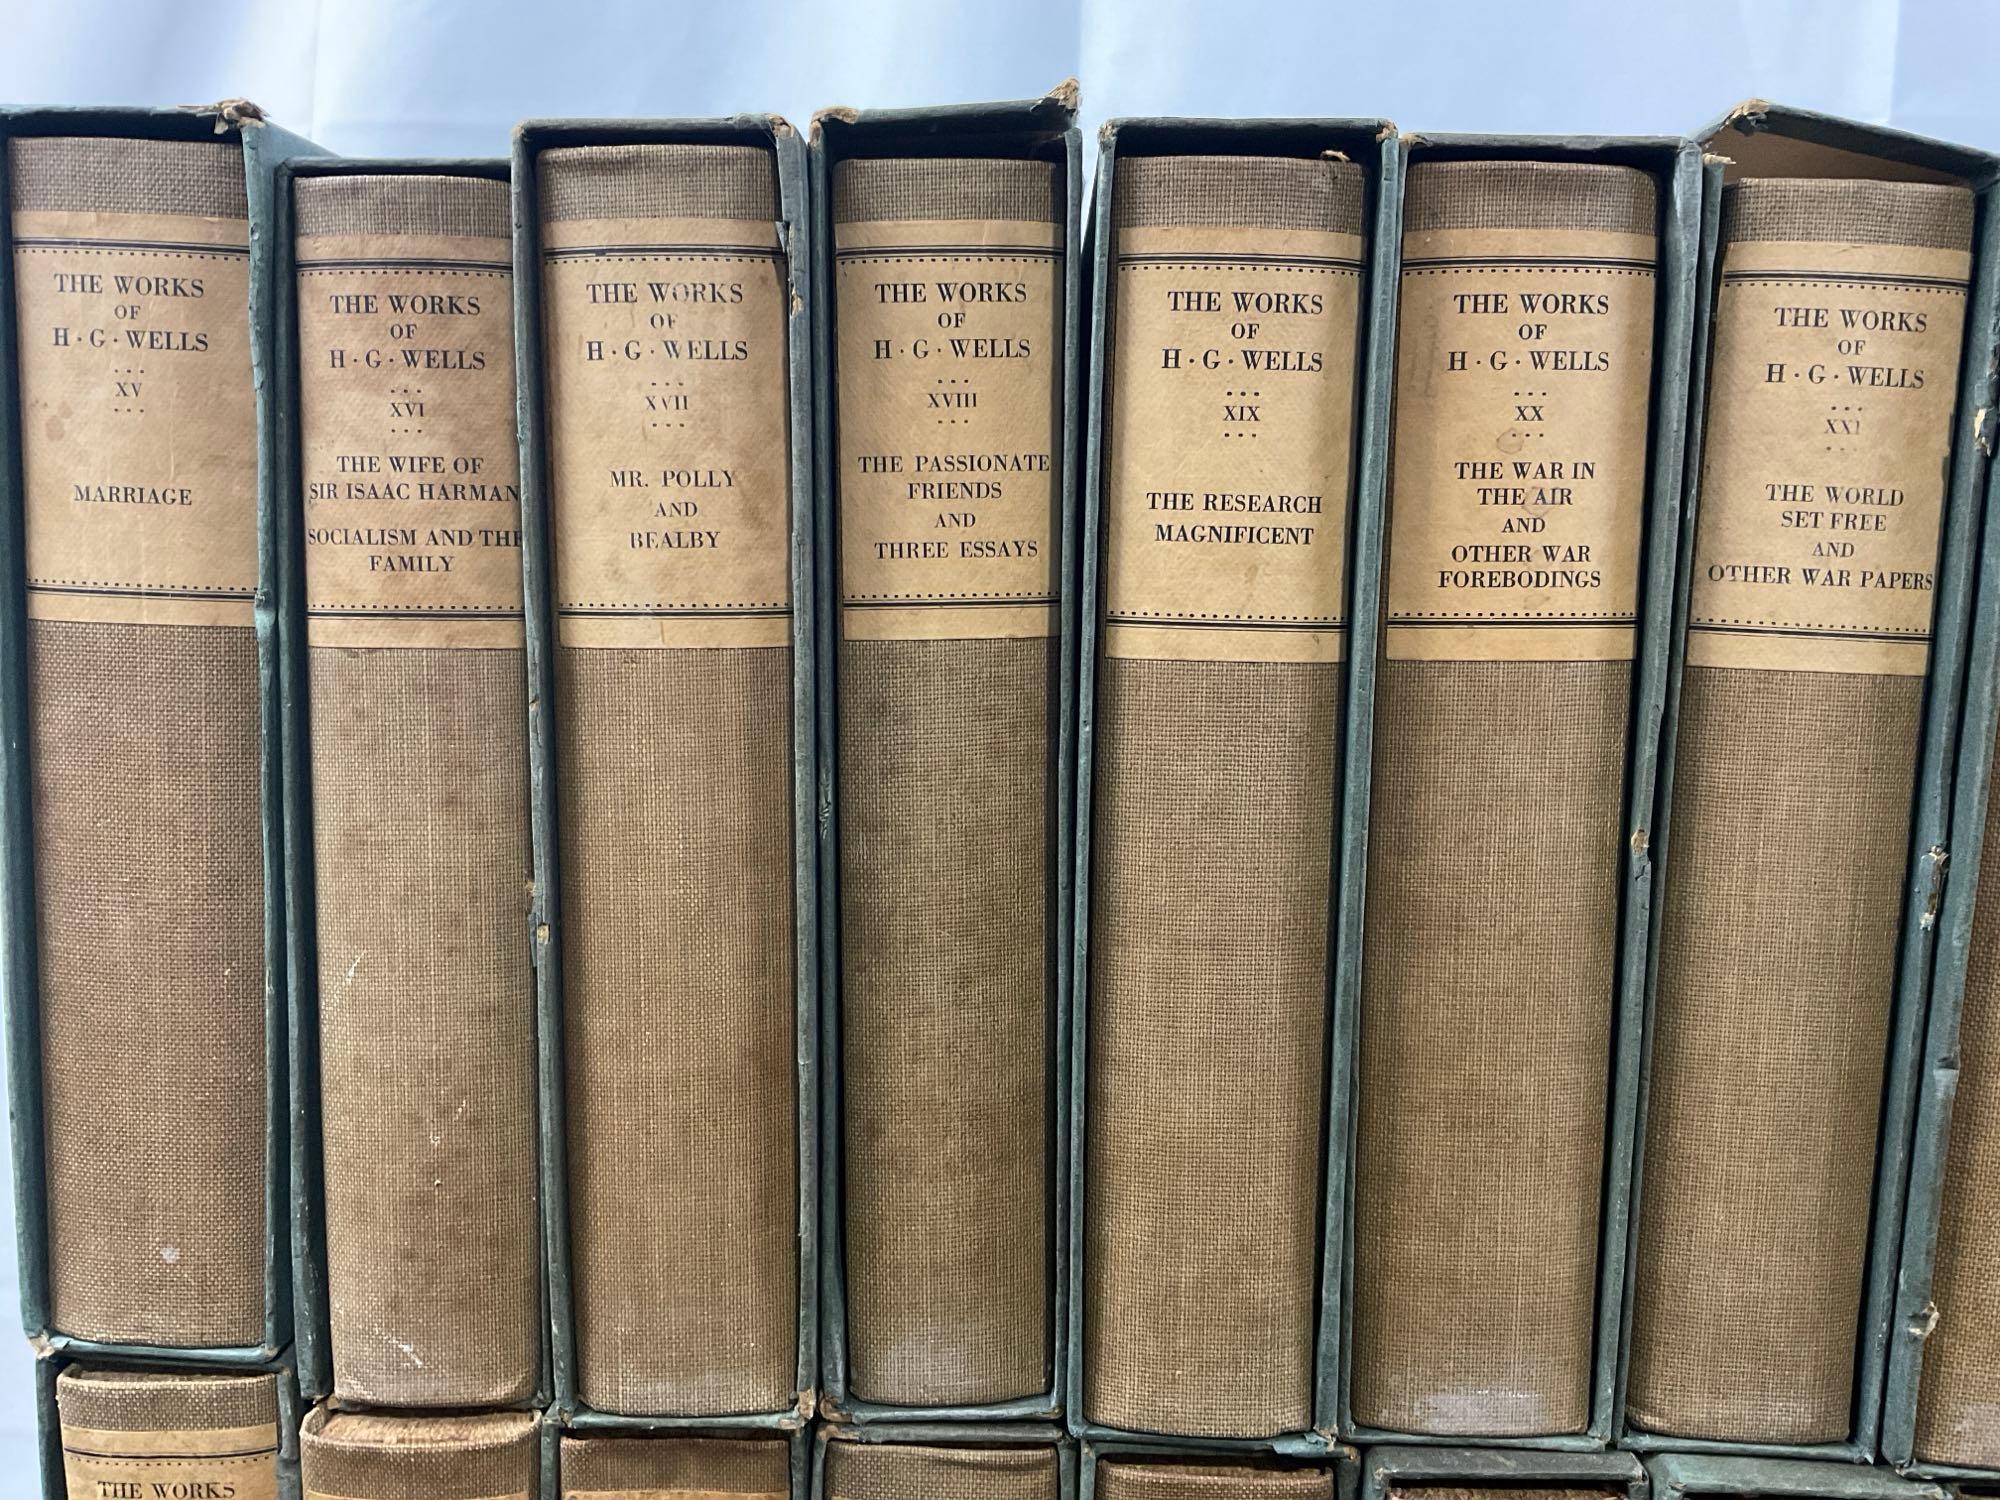 Signed The Works of H.G. Wells Atlantic Edition, LE #d 894/1050 for America, 28 volumes, full set